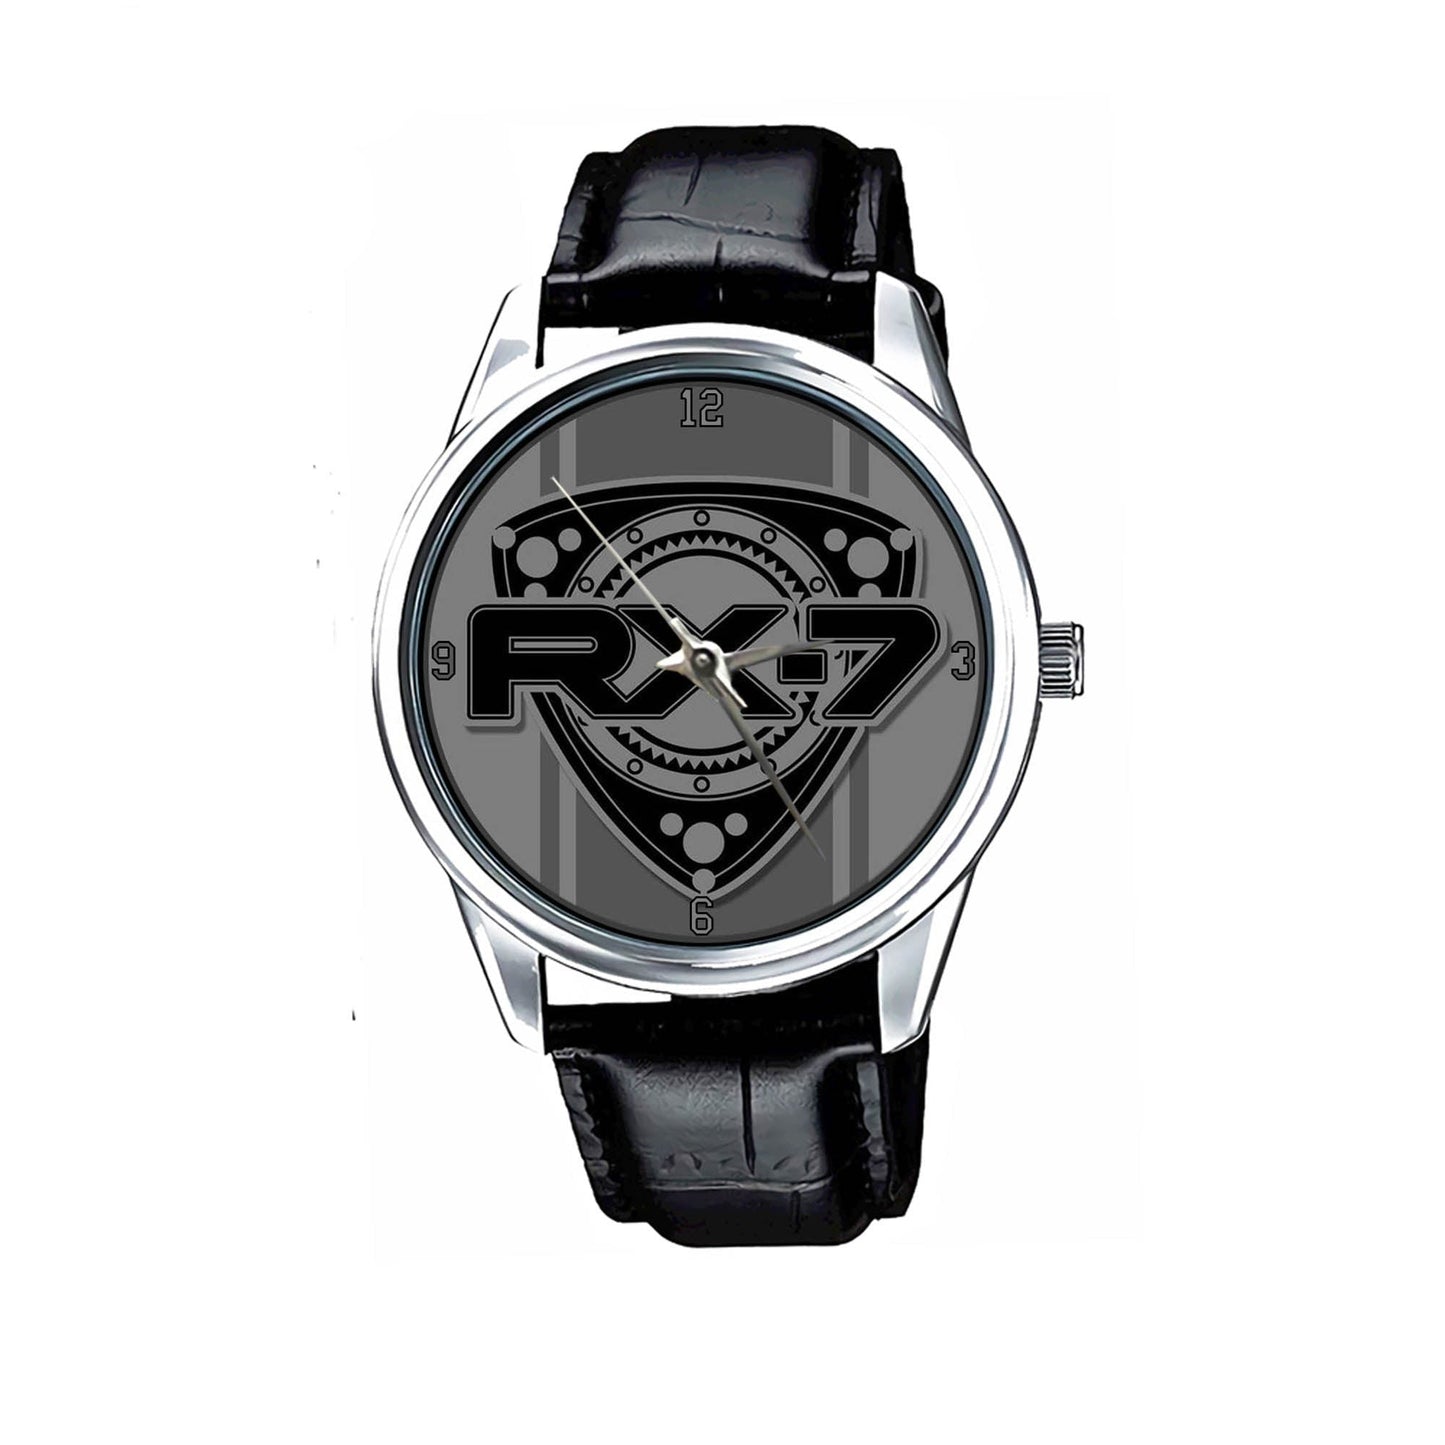 Mazda RX-7 Plate Rotary Engine Watches KP274